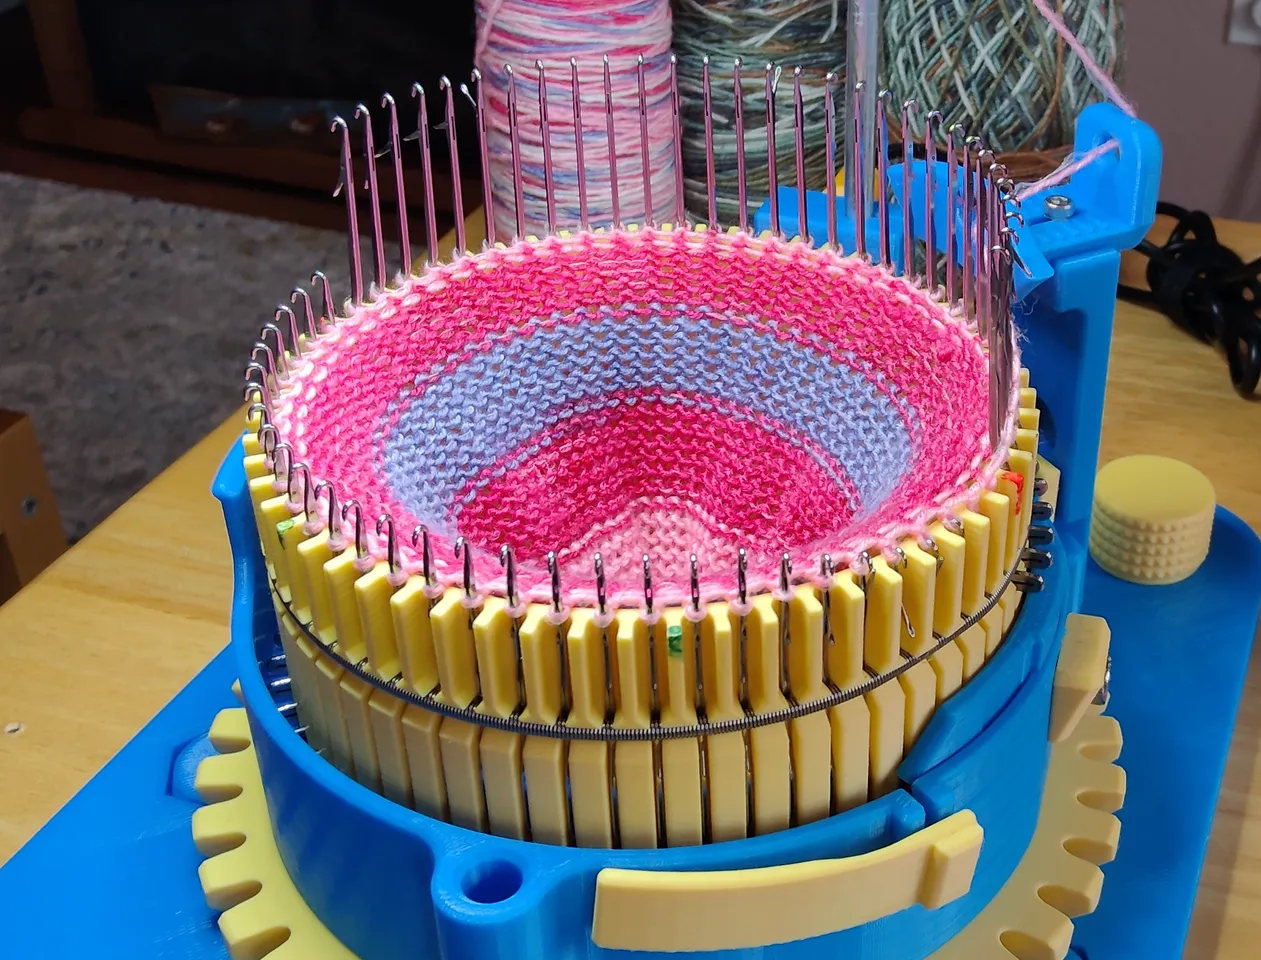 Circular Sock Knitting Machine For My MOM and YOU! V2! With Ribber